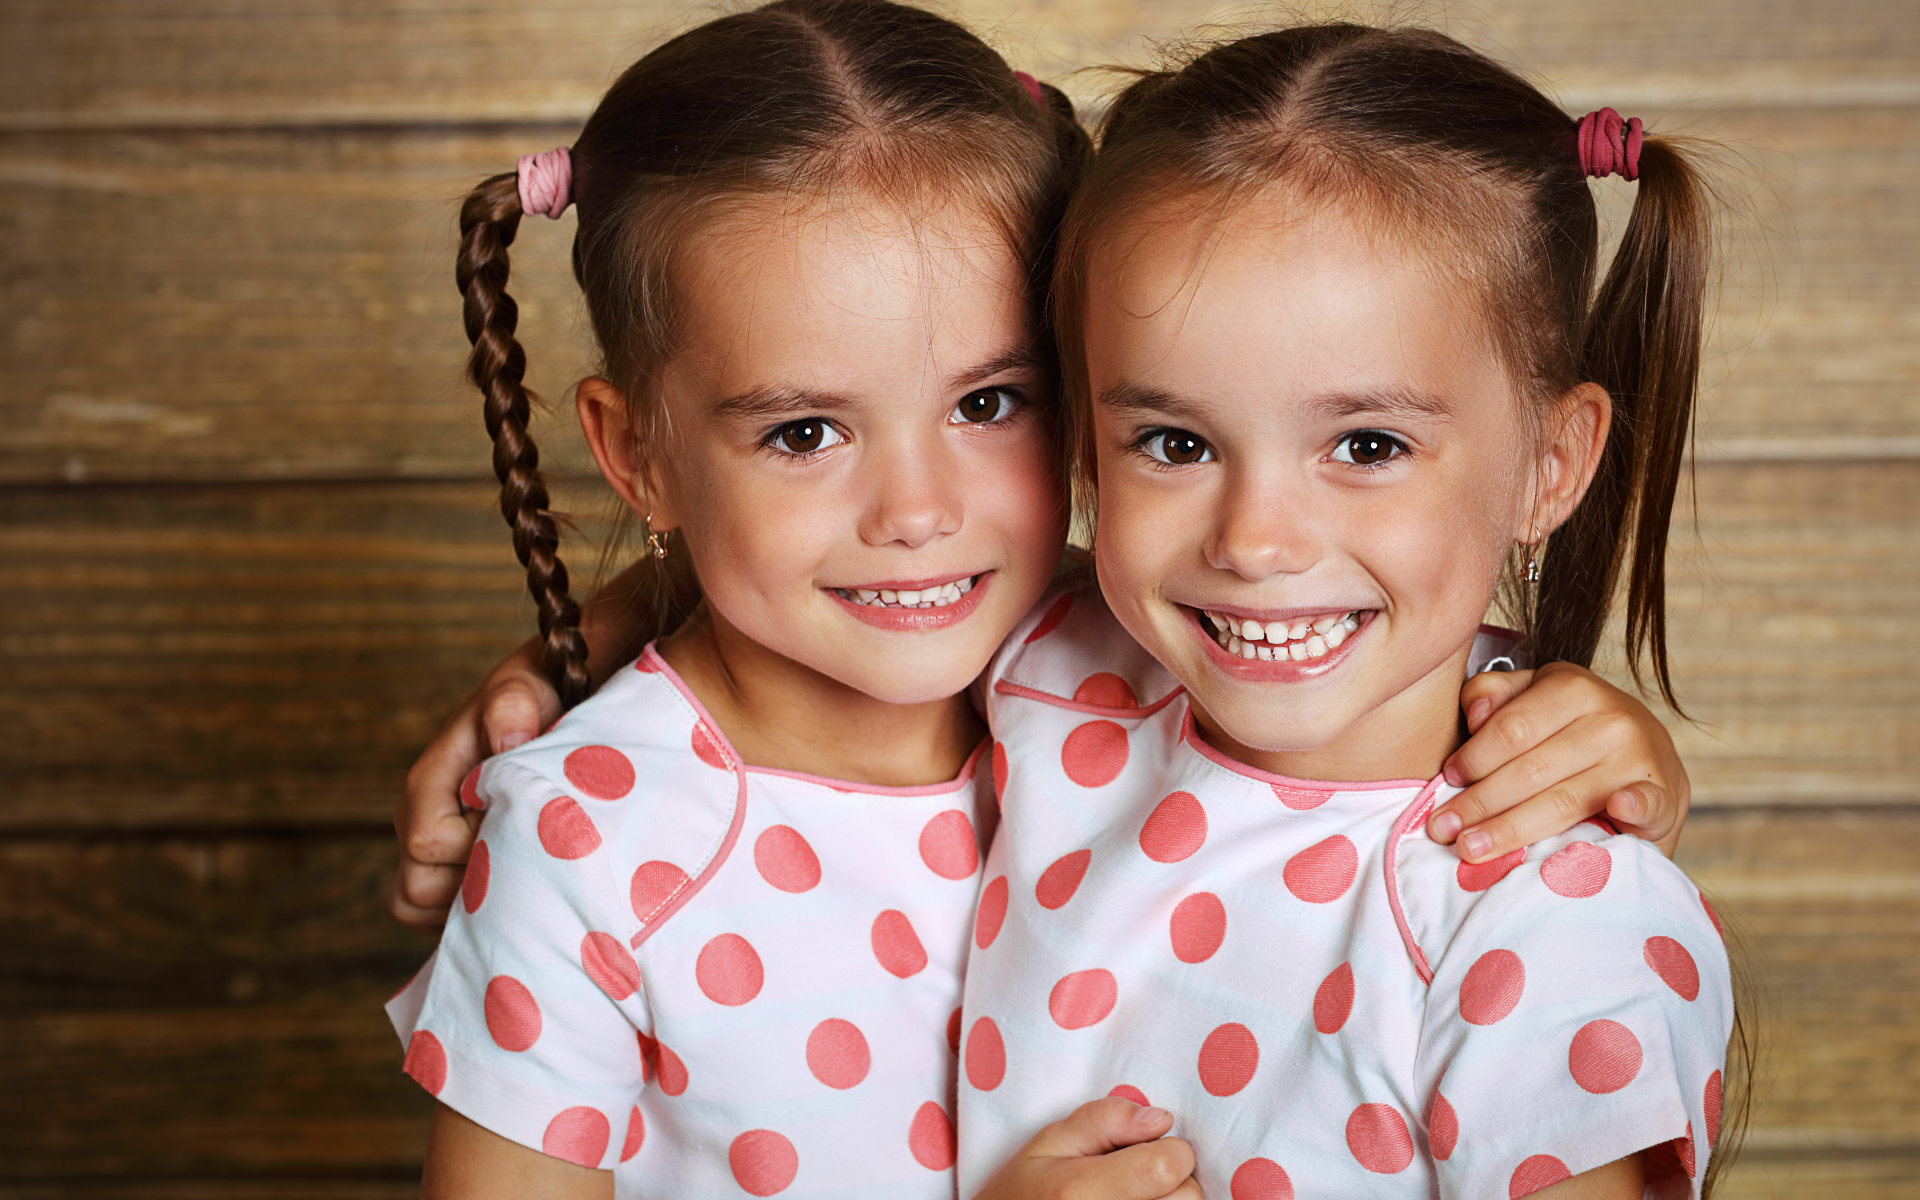 Little twin sisters showing nice teeth in their smiles.